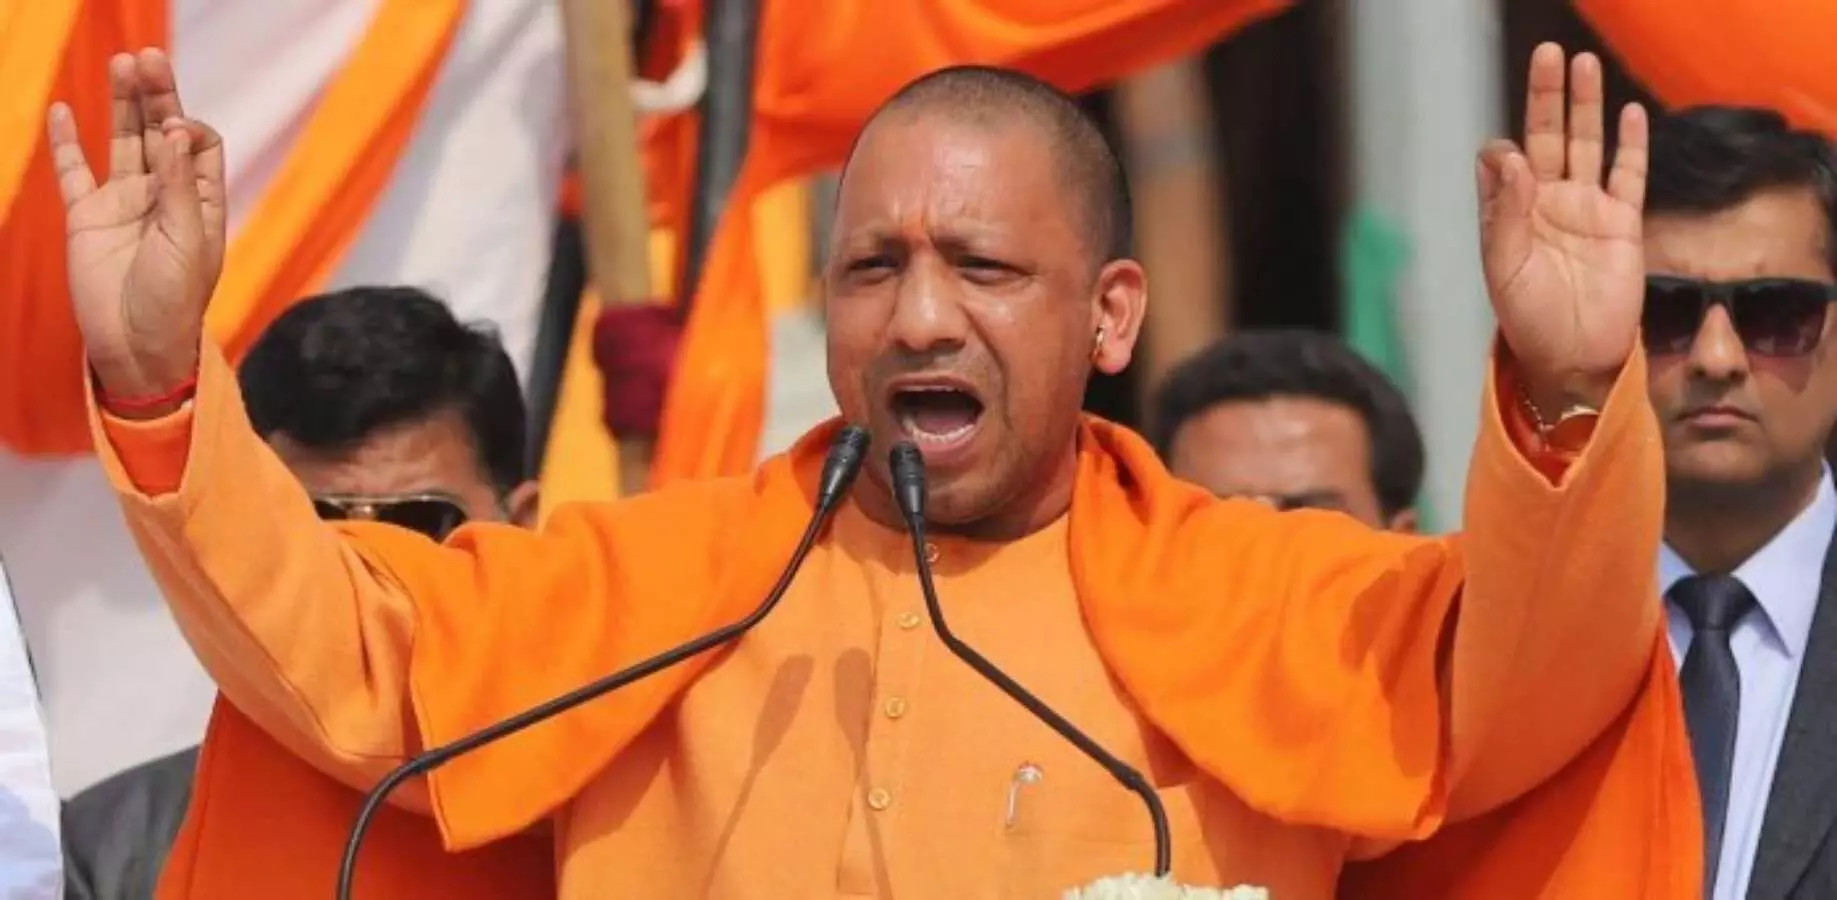 cm yogi took command of up by election 2022 in his hands rally will be held in mainpuri rampur khatauli